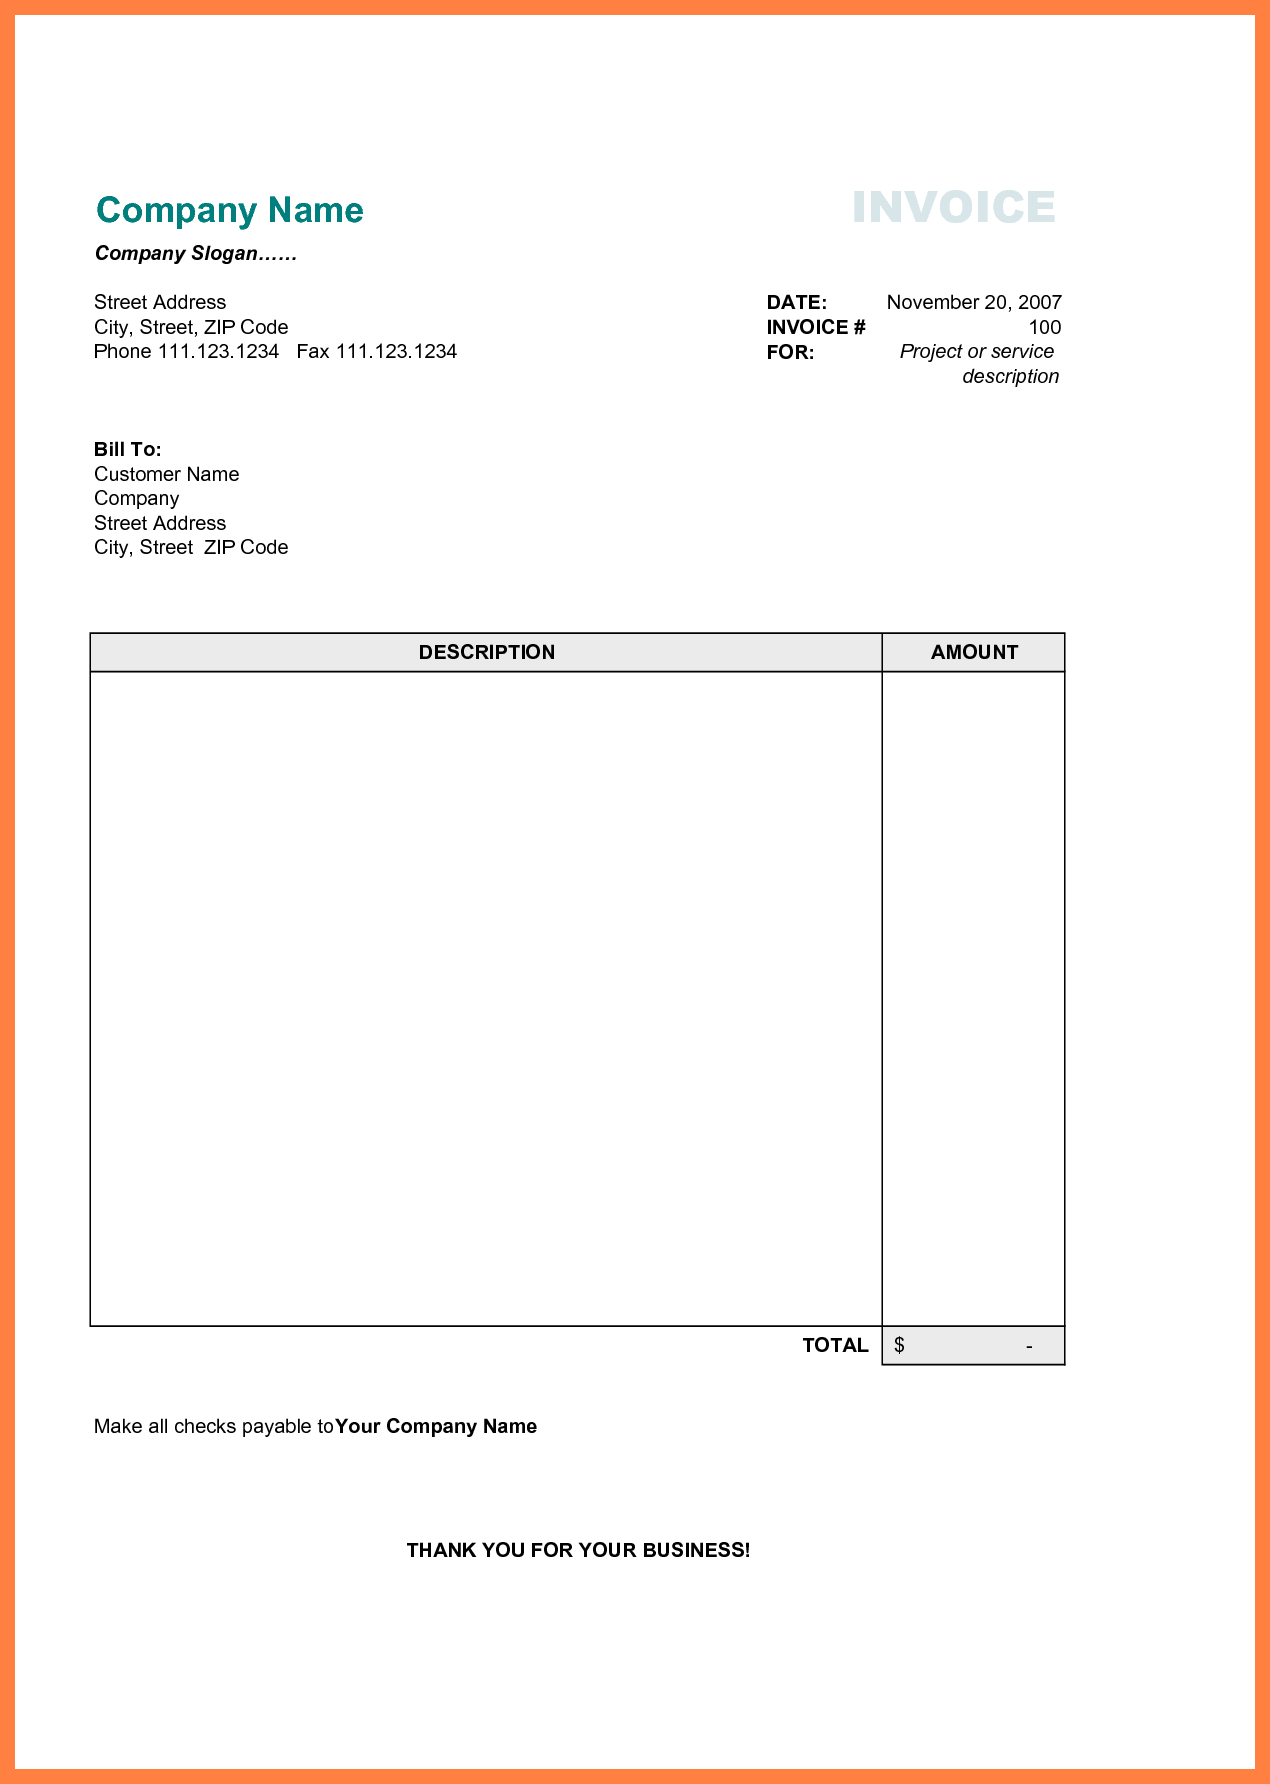 Free Printable Business Invoice Template - Invoice Format In Excel - Invoice Forms Free Printable